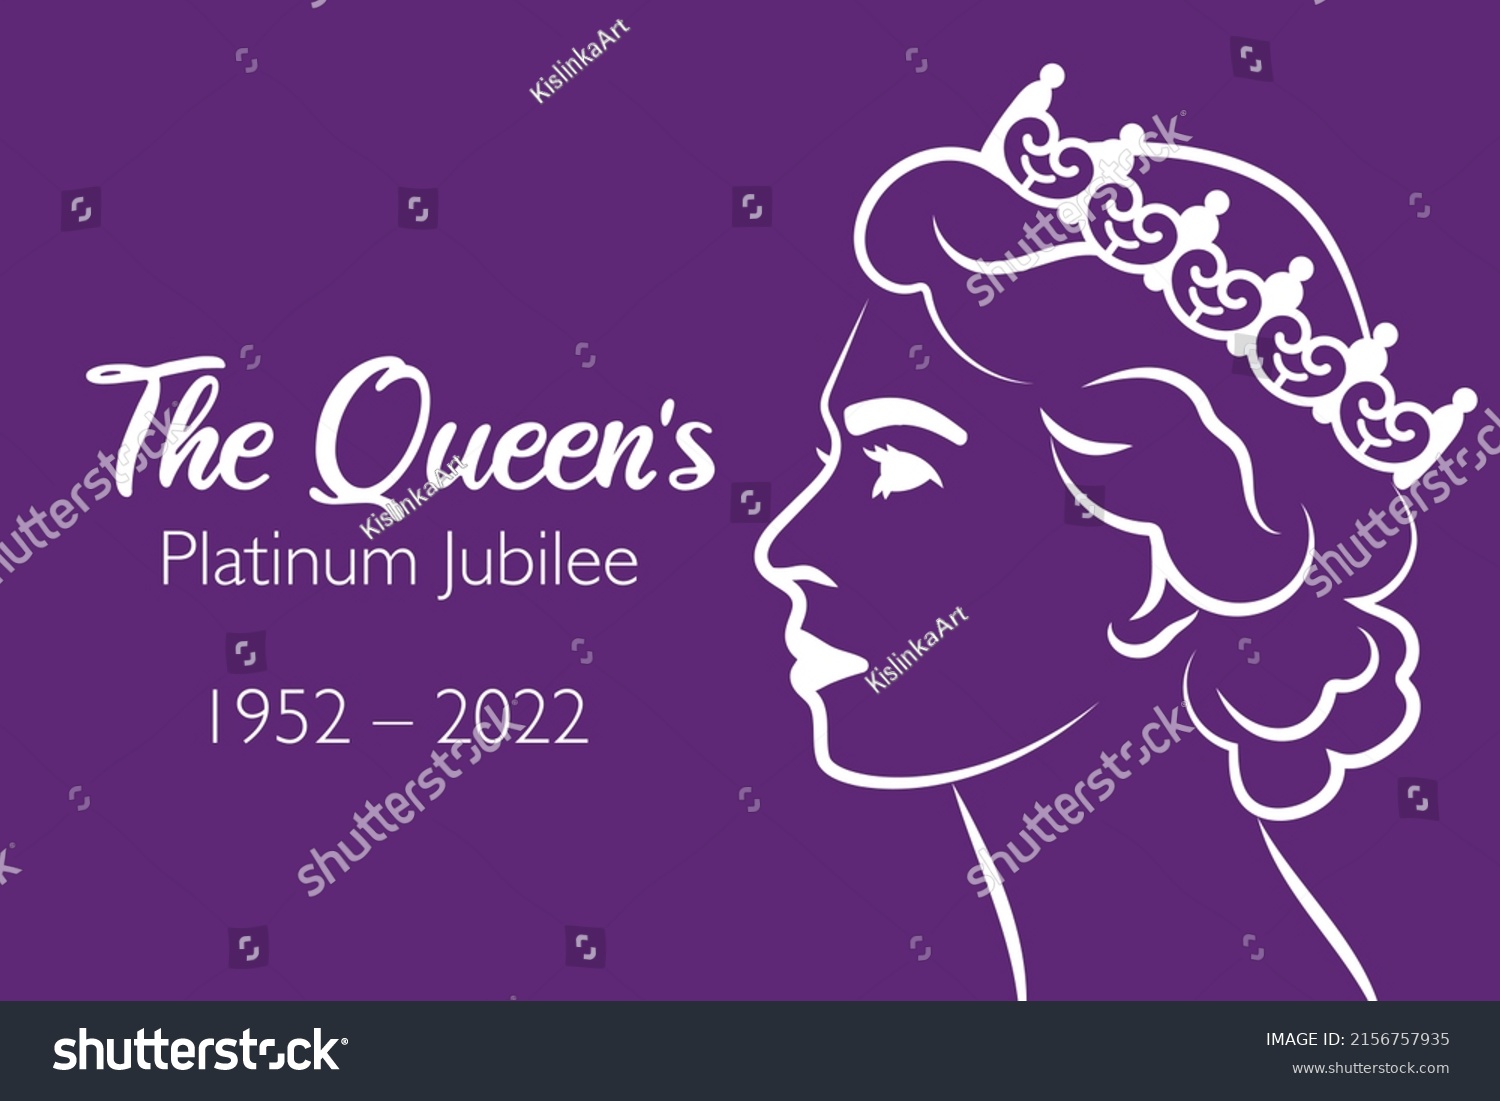 SVG of The Queen's Platinum Jubilee celebration banner with side profile of Queen Elizabeth in crown 70 years. Ideal design for banners, flayers, social media, stickers, greeting cards. 
 svg